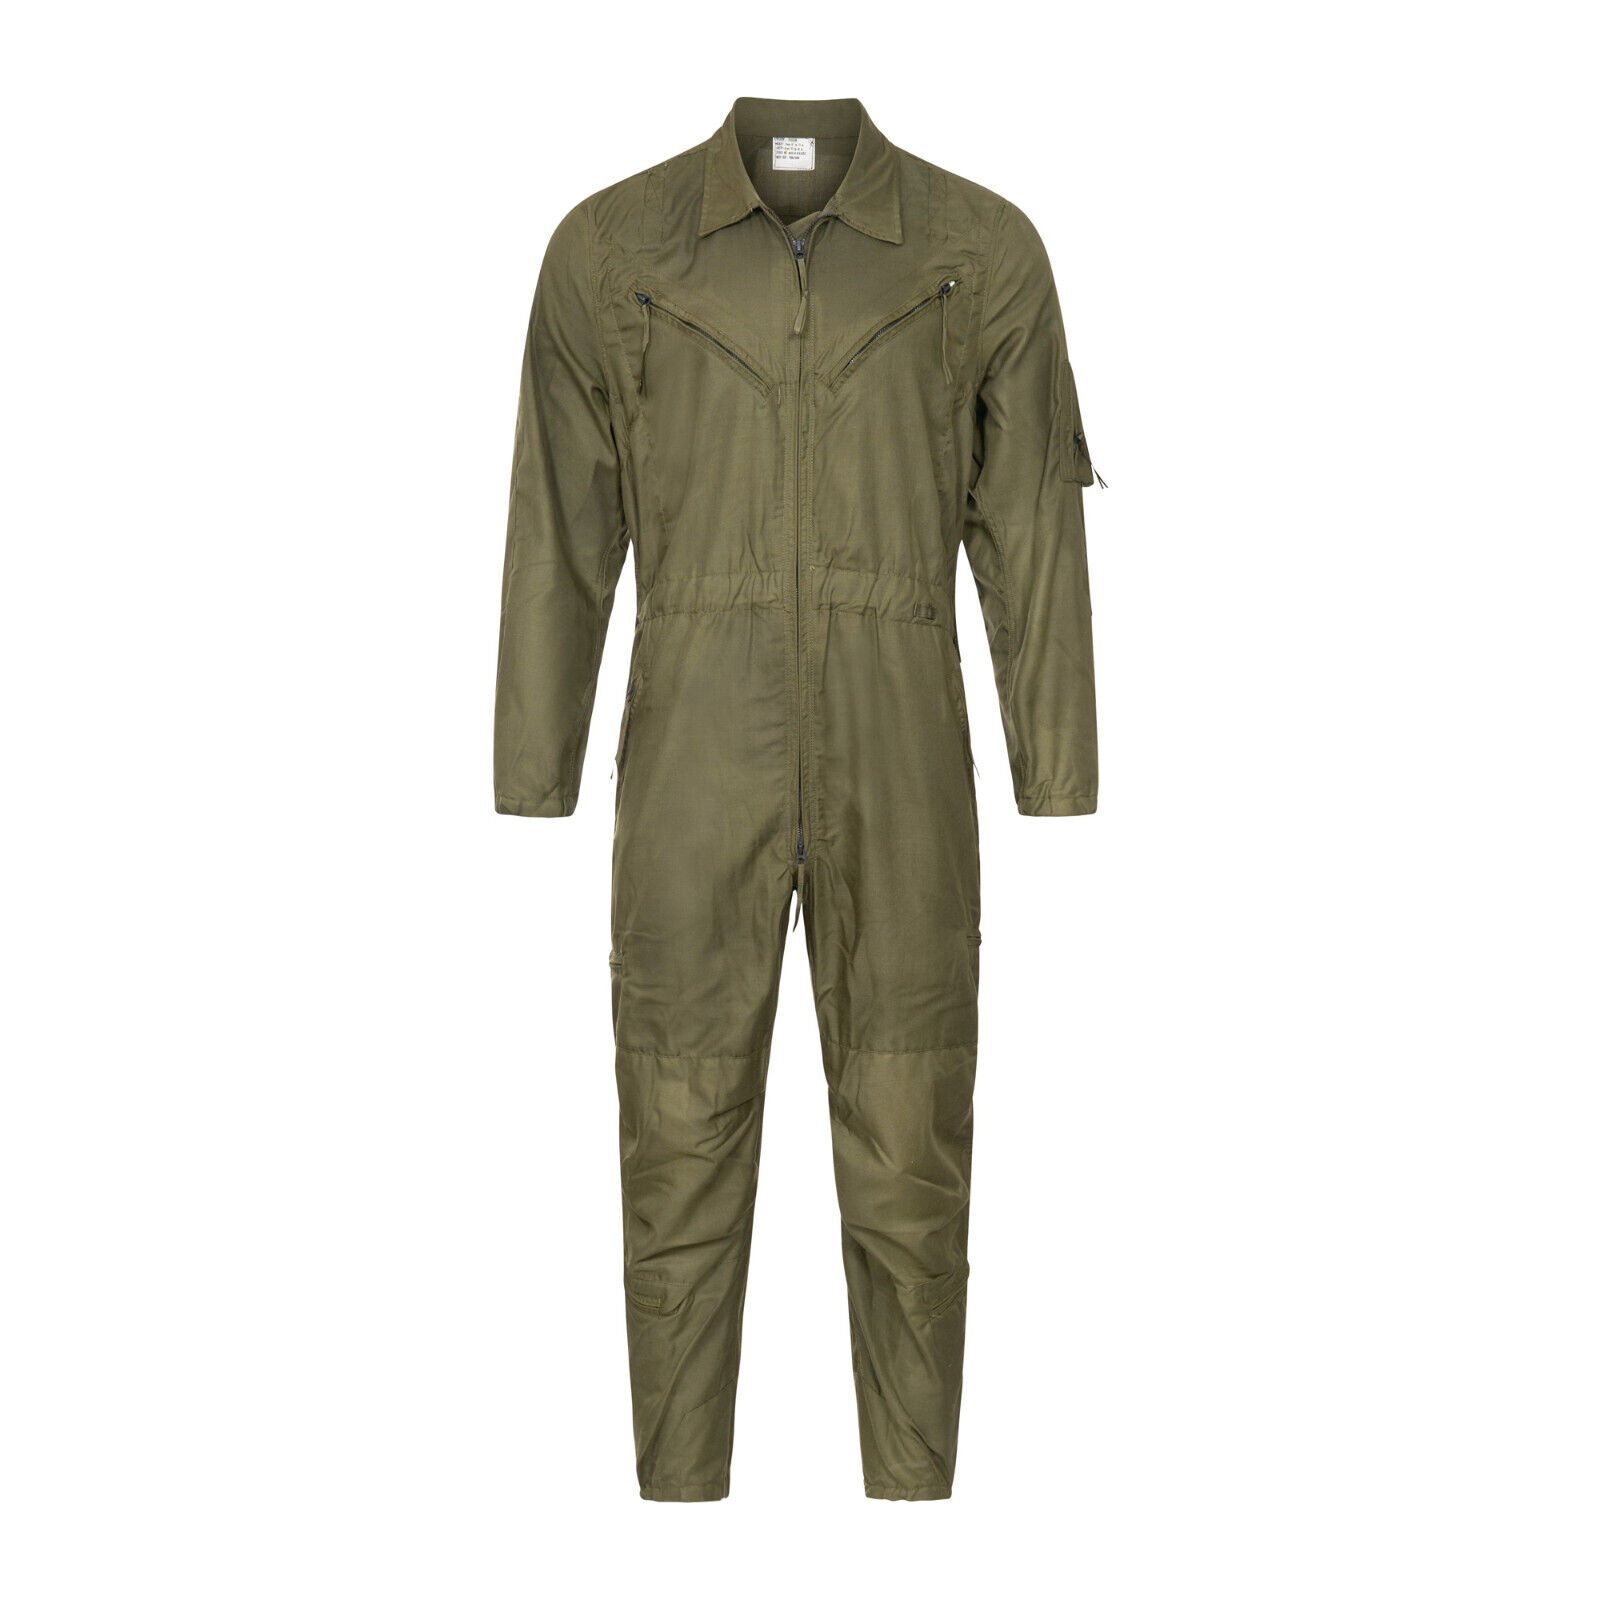 Original US Flight Suit Nomex Army Vehicle Crewman Coverall Uniform Overall Used